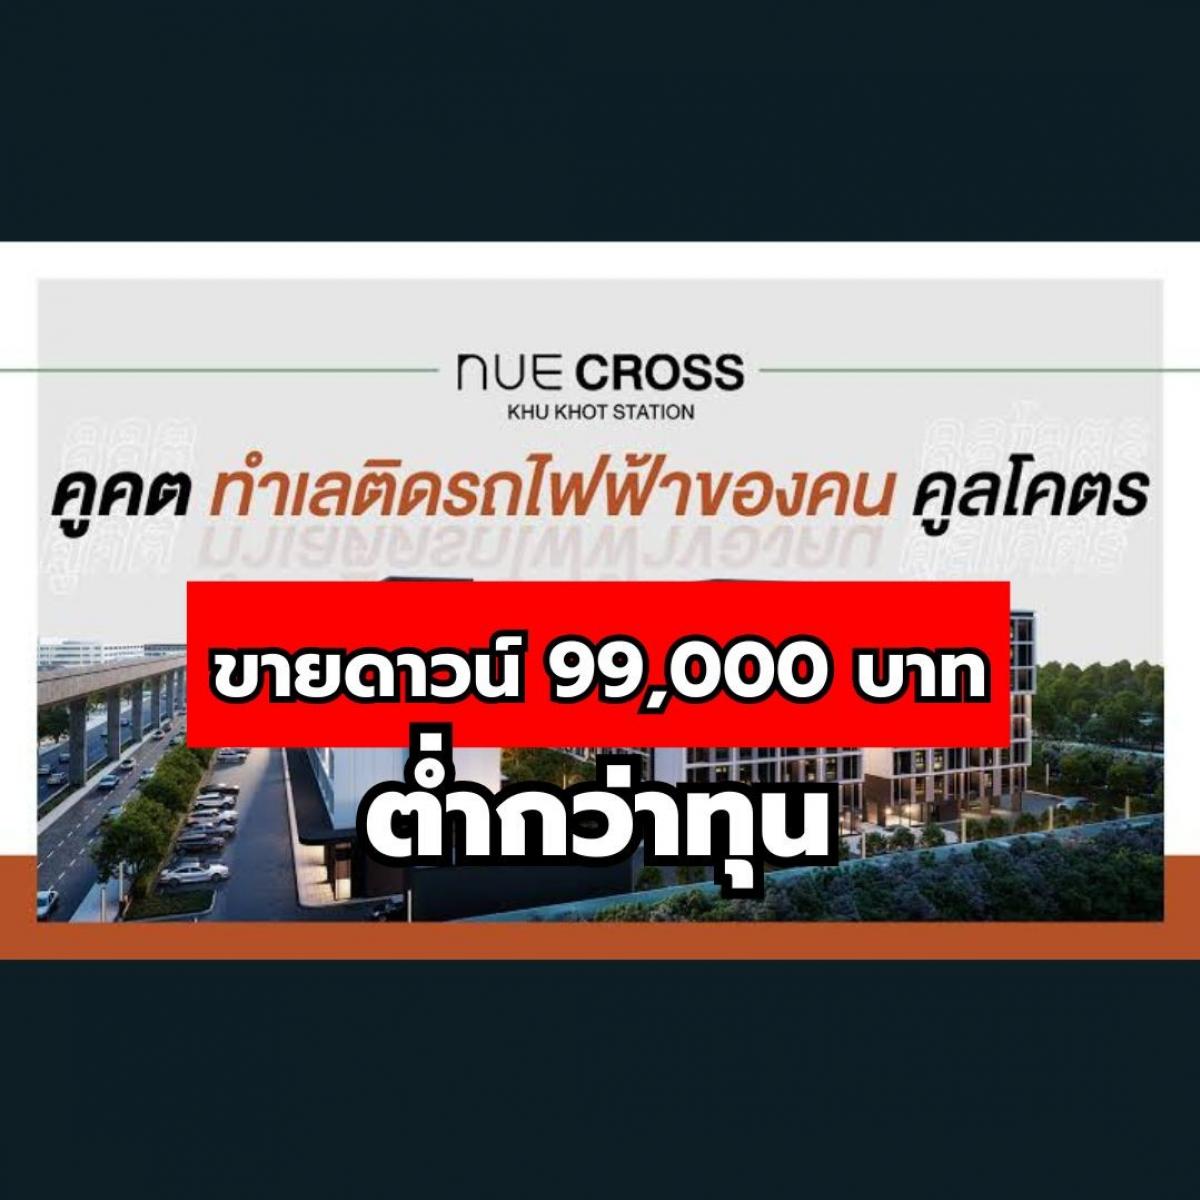 Sale DownCondoPathum Thani,Rangsit, Thammasat : Below cost, selling down payment 99,000 baht, Nue Cross Khu Khot Station, 26.85 sq m. Low Rise Condo, next to Lam Luk Ka Road. Near the Green Line, Khu Khot Station, 120 meters from Noble, nothing cheaper than this!!!